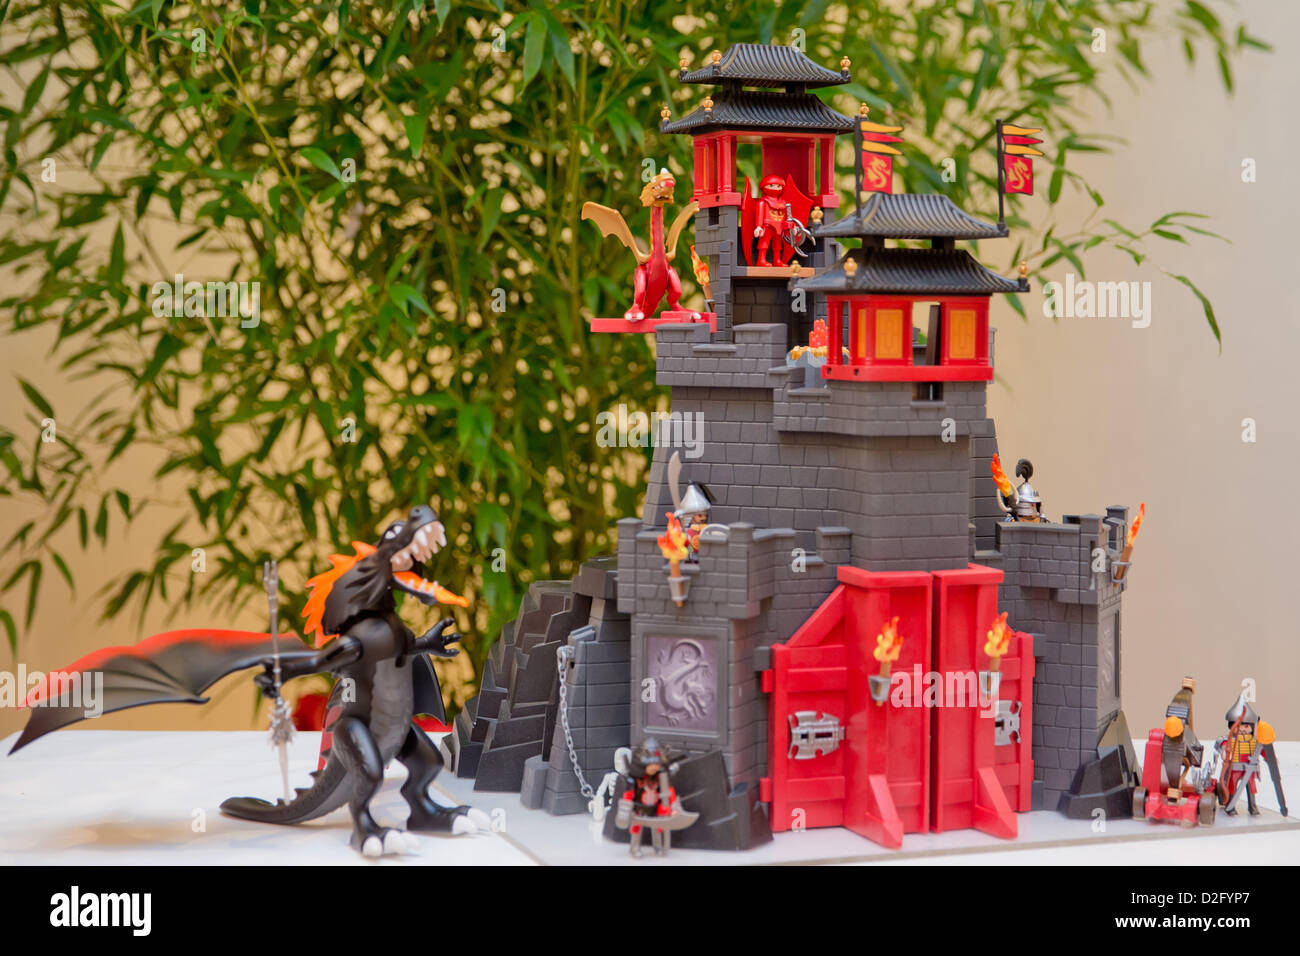 The 'Gigantic Battle Dragon' and 'Secret Dragon Castle' of toy manufacturer  Playmobil are on display at the annual press conference of the professional  association of toy manufacturers idee+spiel in Nuremberg, Germany, 23